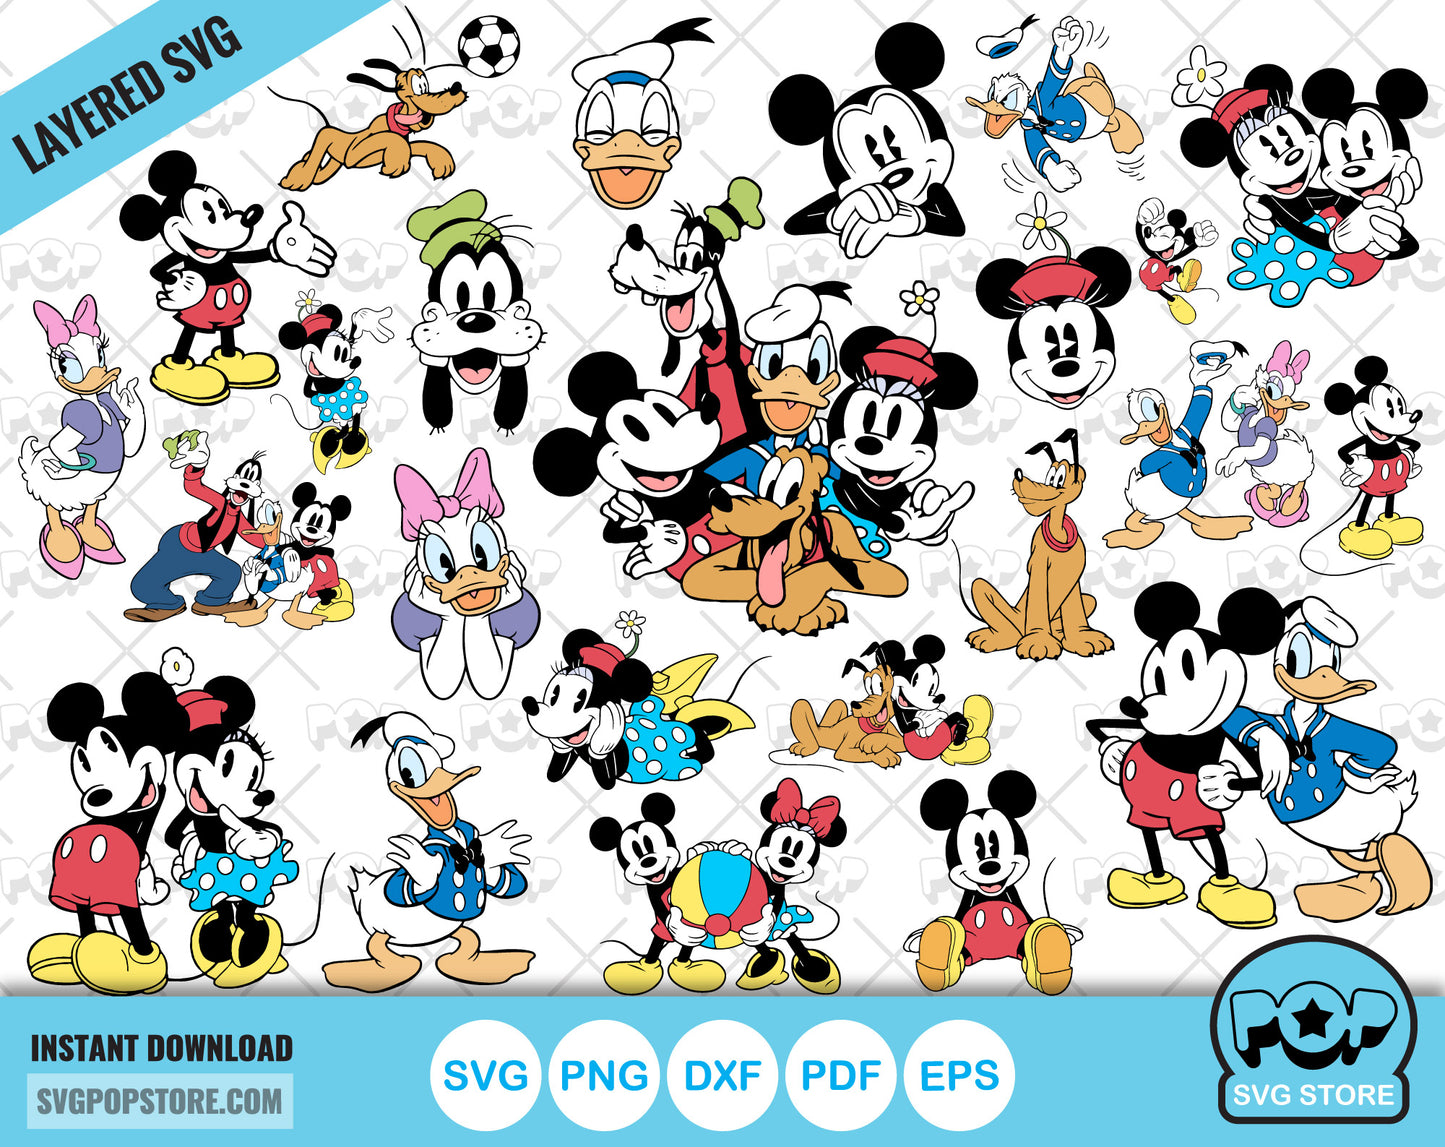 Classic Mickey and Friends clipart bundle, svg cut files for Cricut / Silhouette, Mickey & friends png